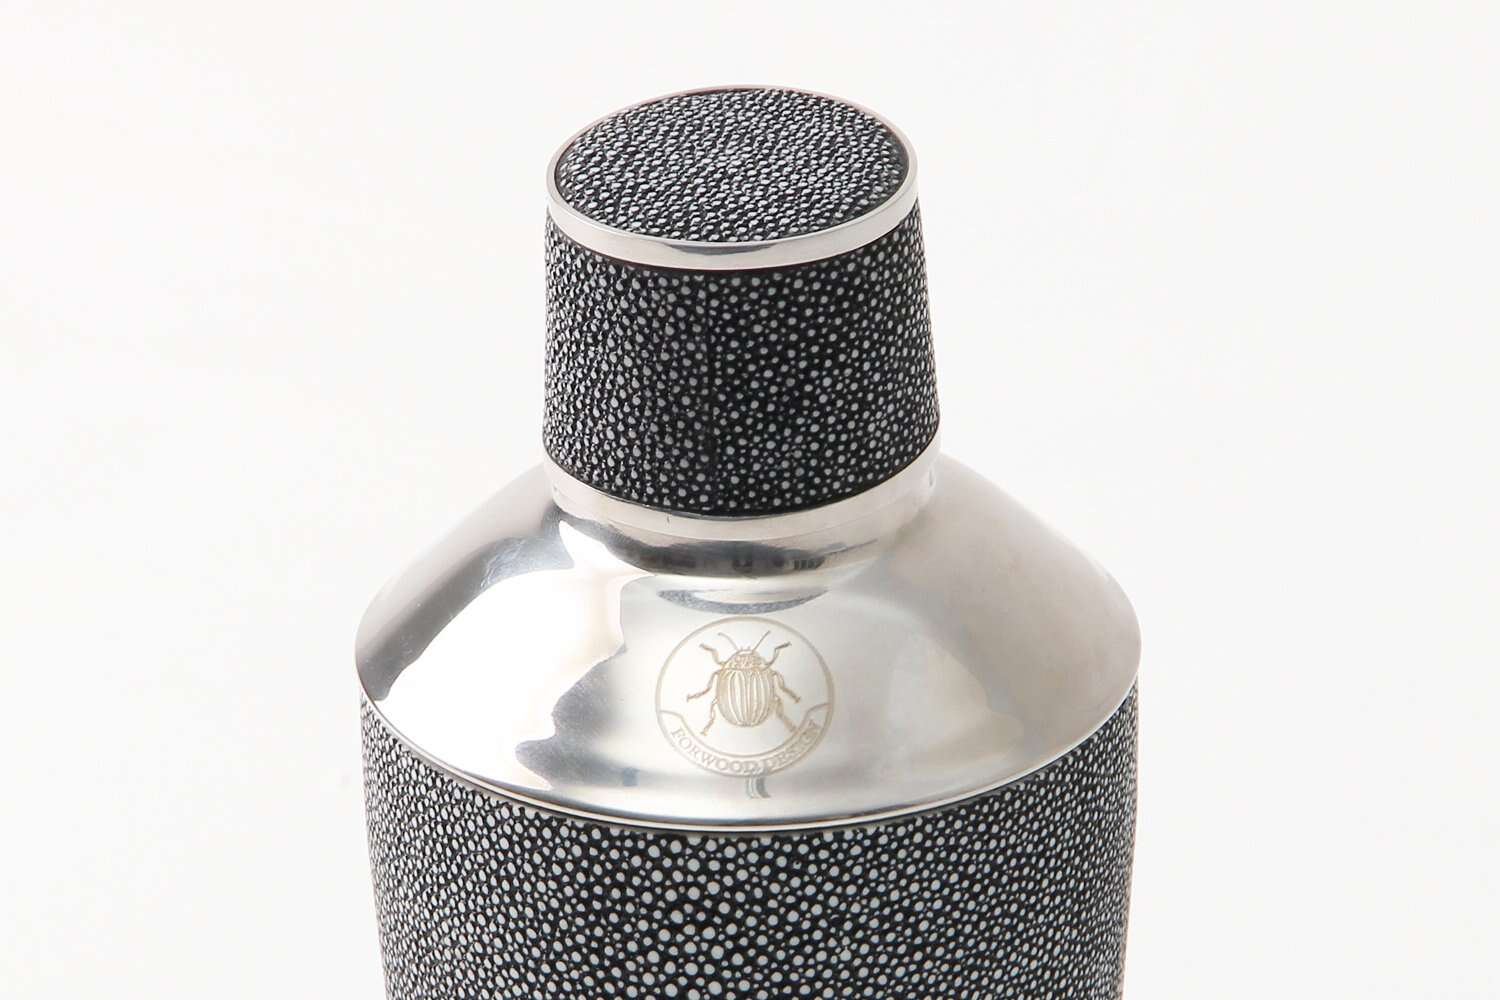 Charcoal shagreen cocktail shaker Unique cocktail shaker